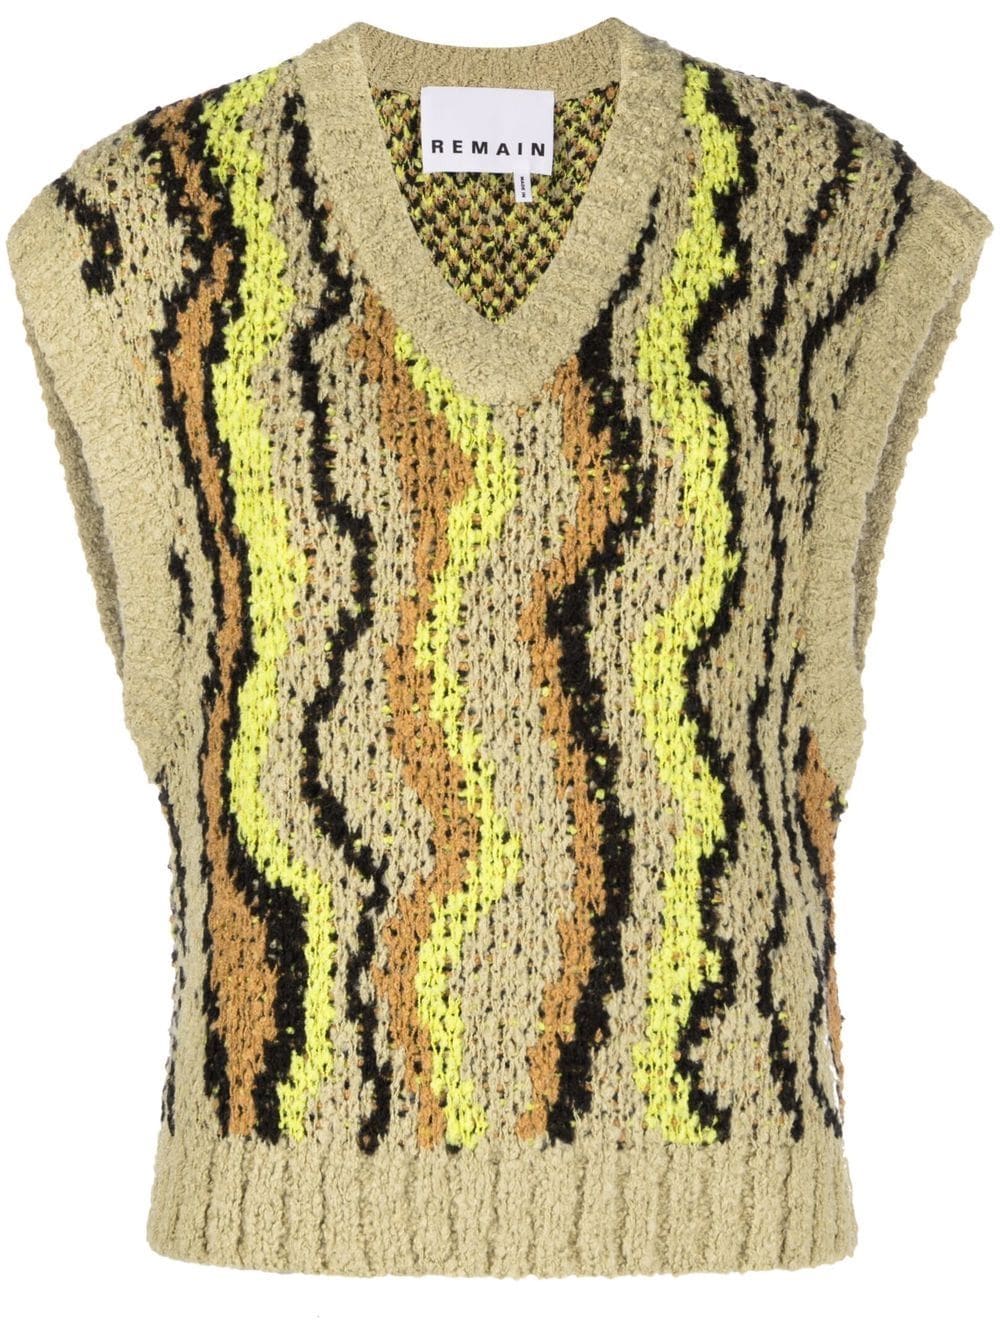 REMAIN jacquard knitted vest - Green